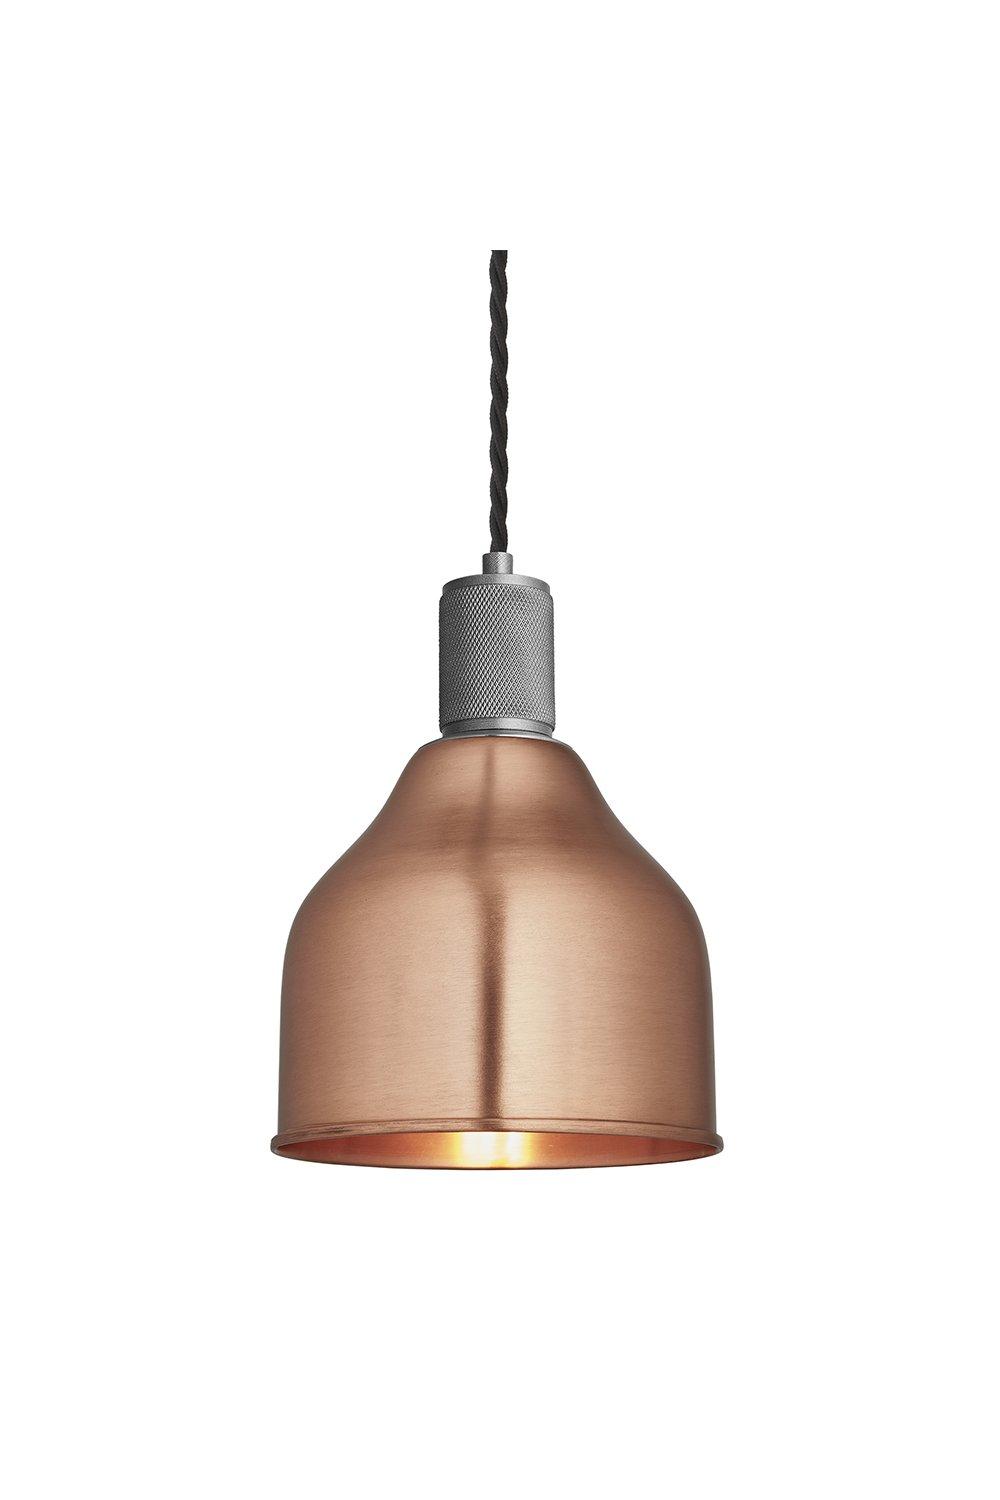 Knurled Cone Pendant Light, 7 Inch, Copper, Pewter Holder